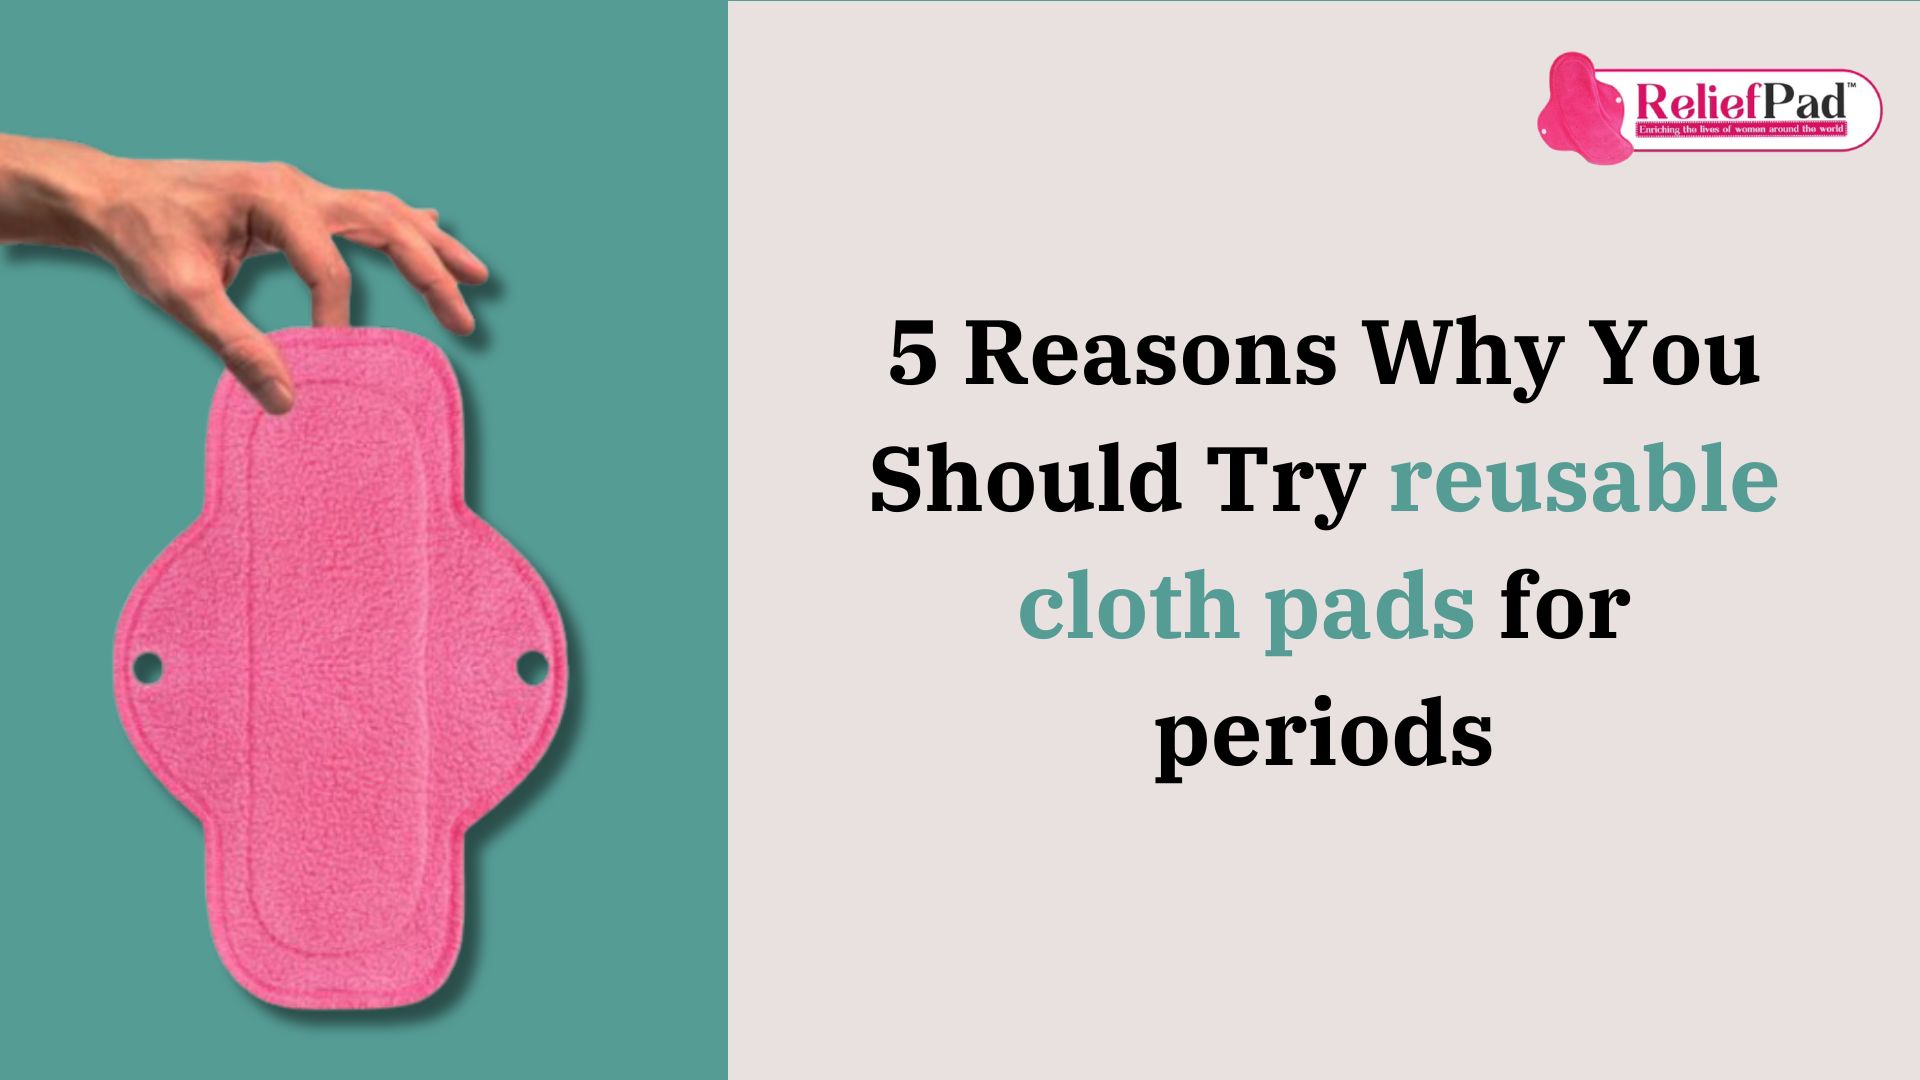 5 Reasons Why You Should Try reusable cloth pads for periods 